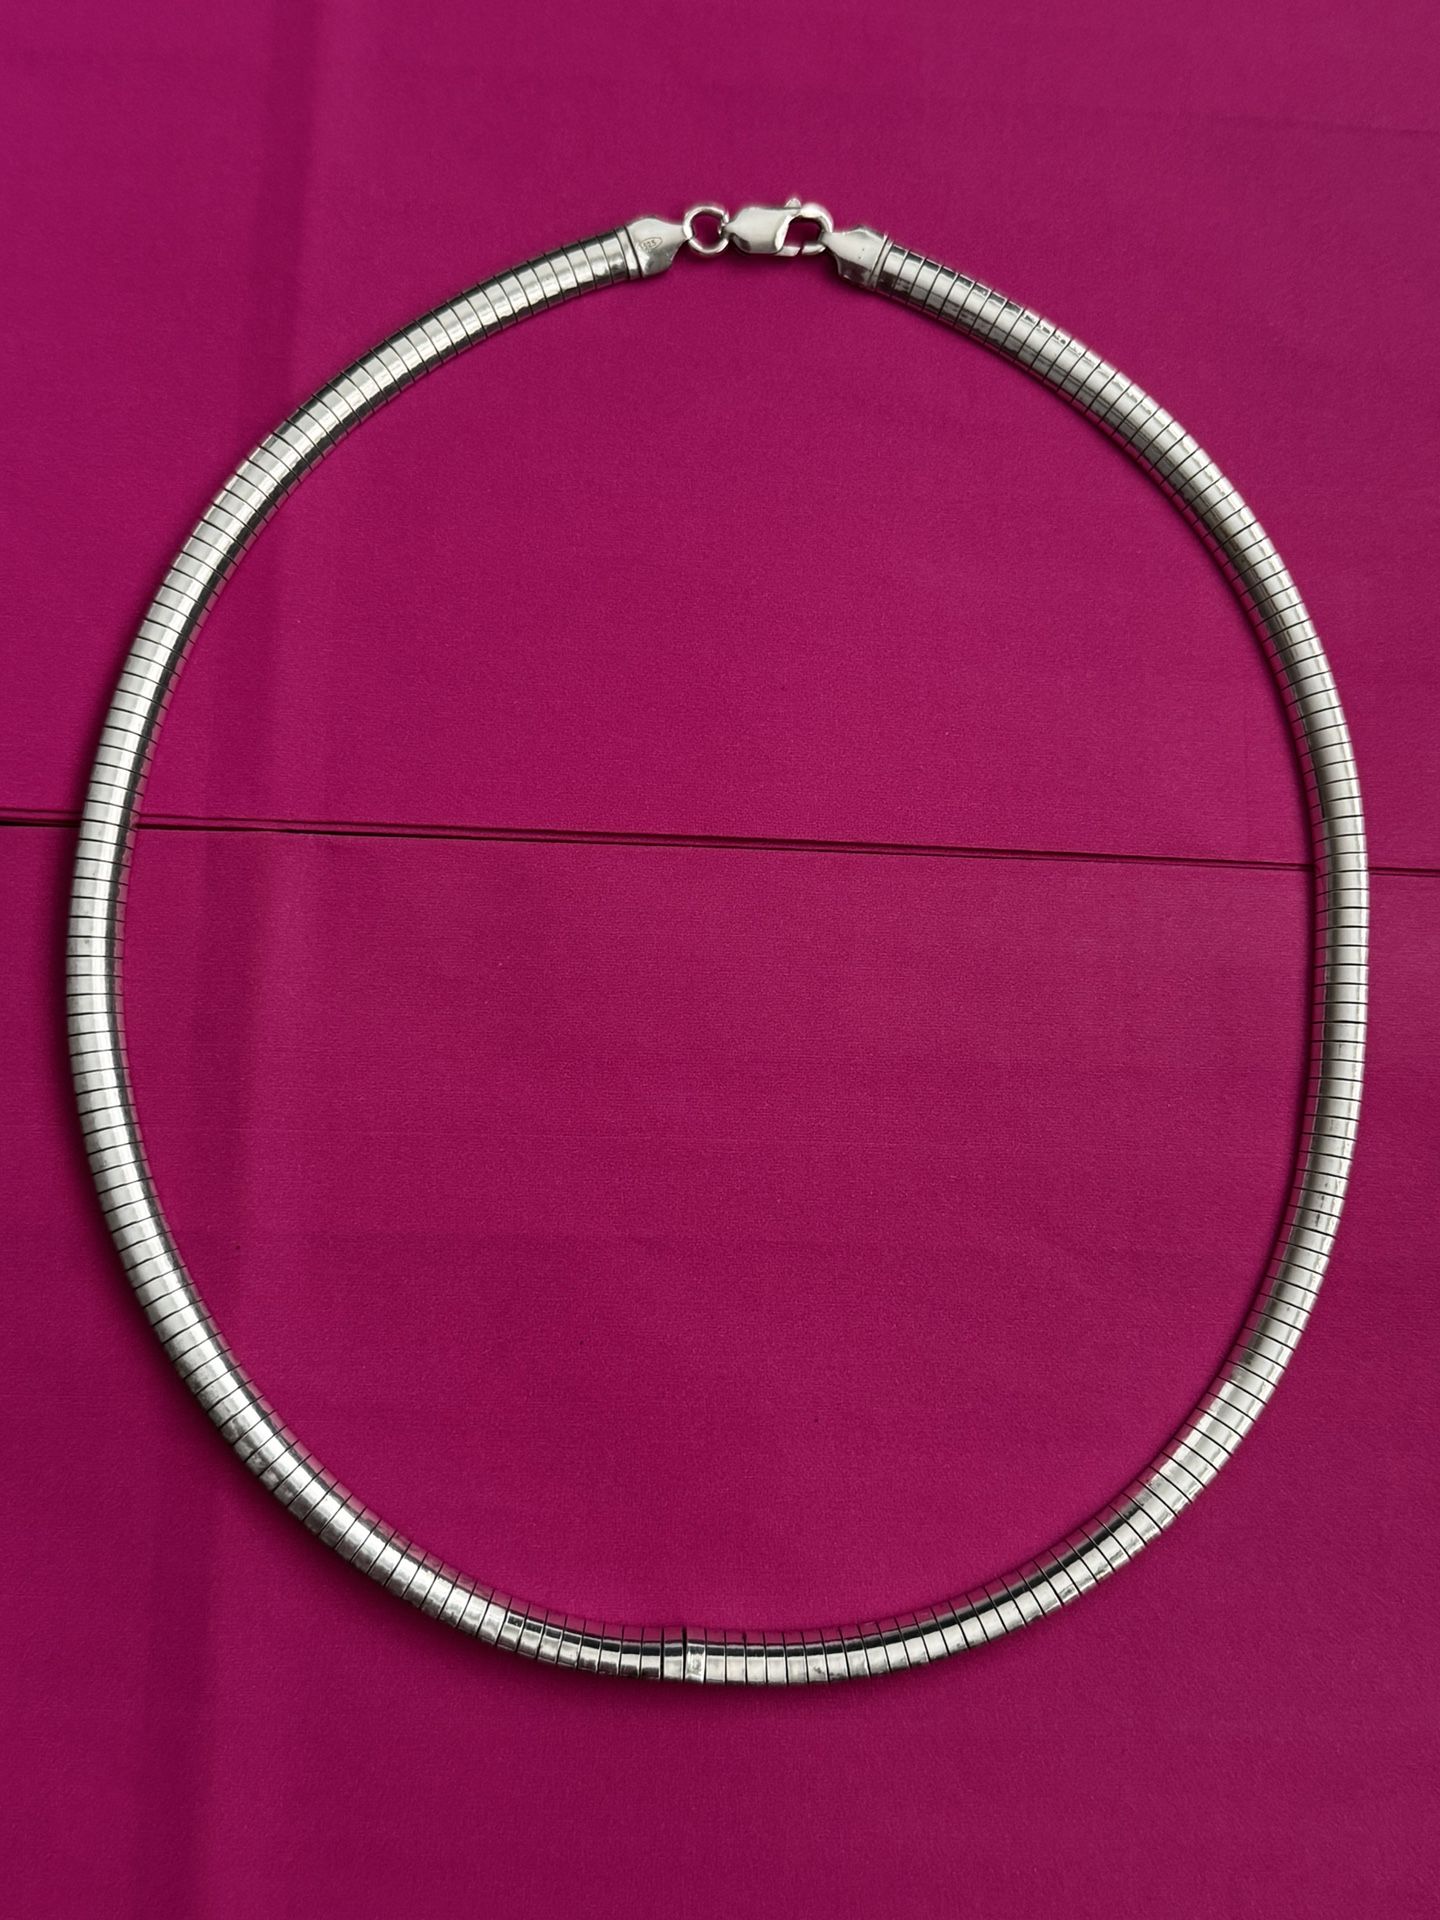 Vintage 925 Italy Sterling Silver Necklace choker  Approx 18 inches long  In great condition